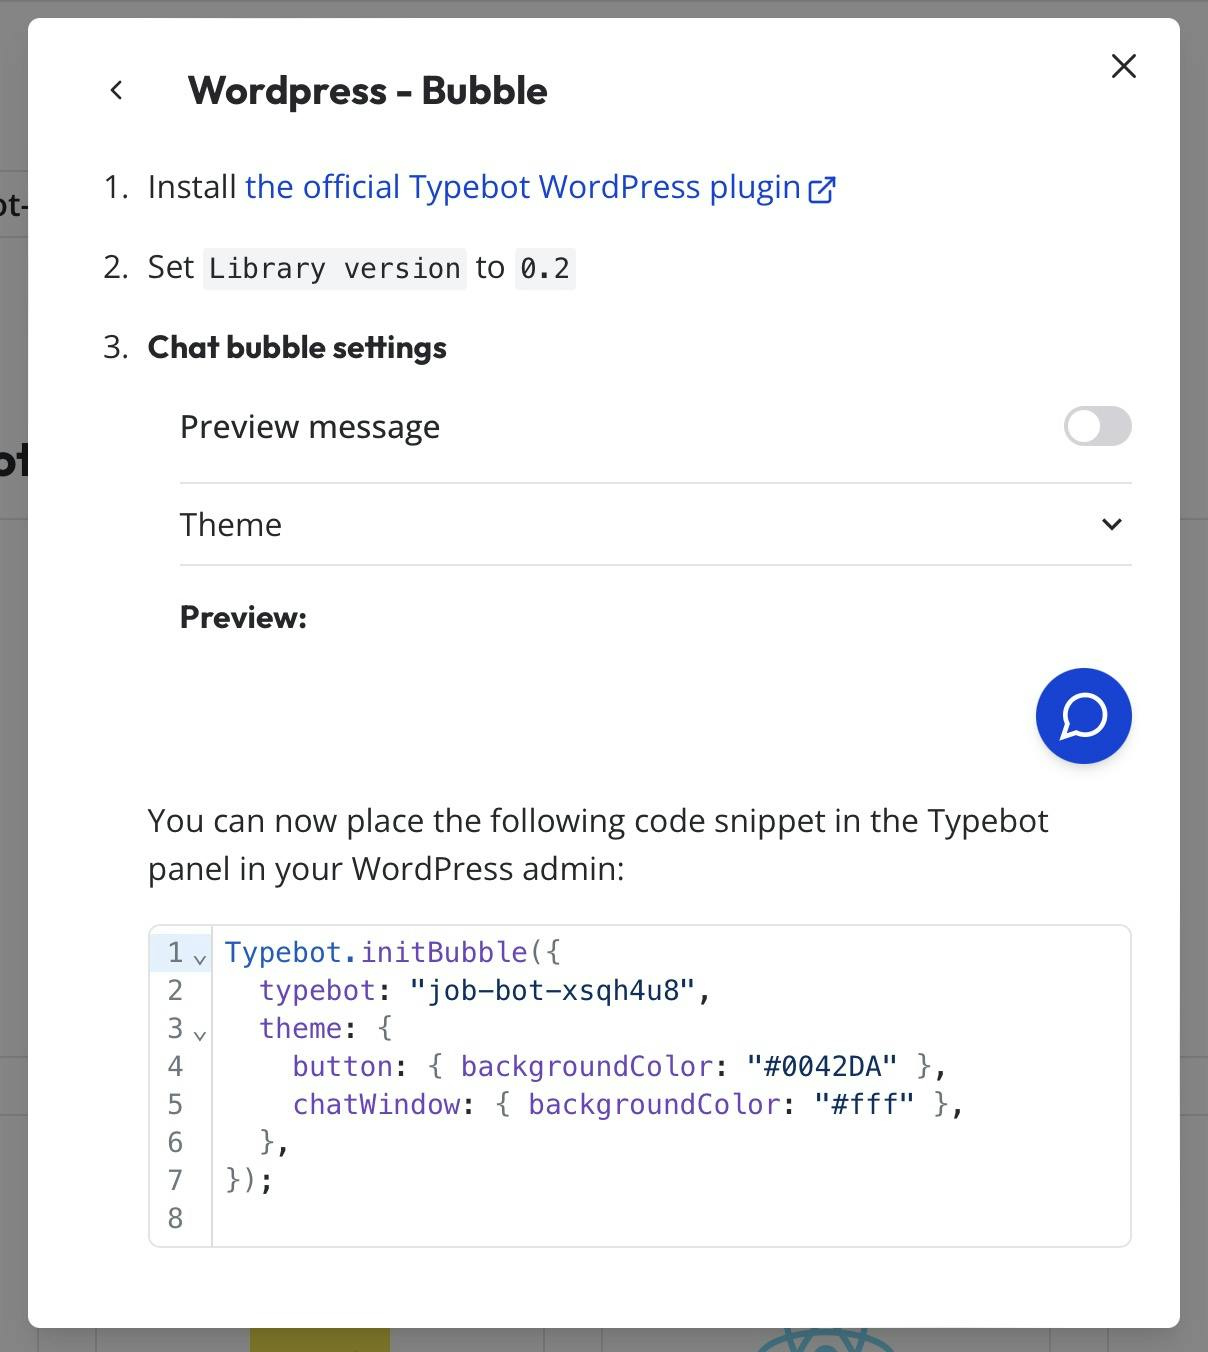 Code snippet for Wordpress